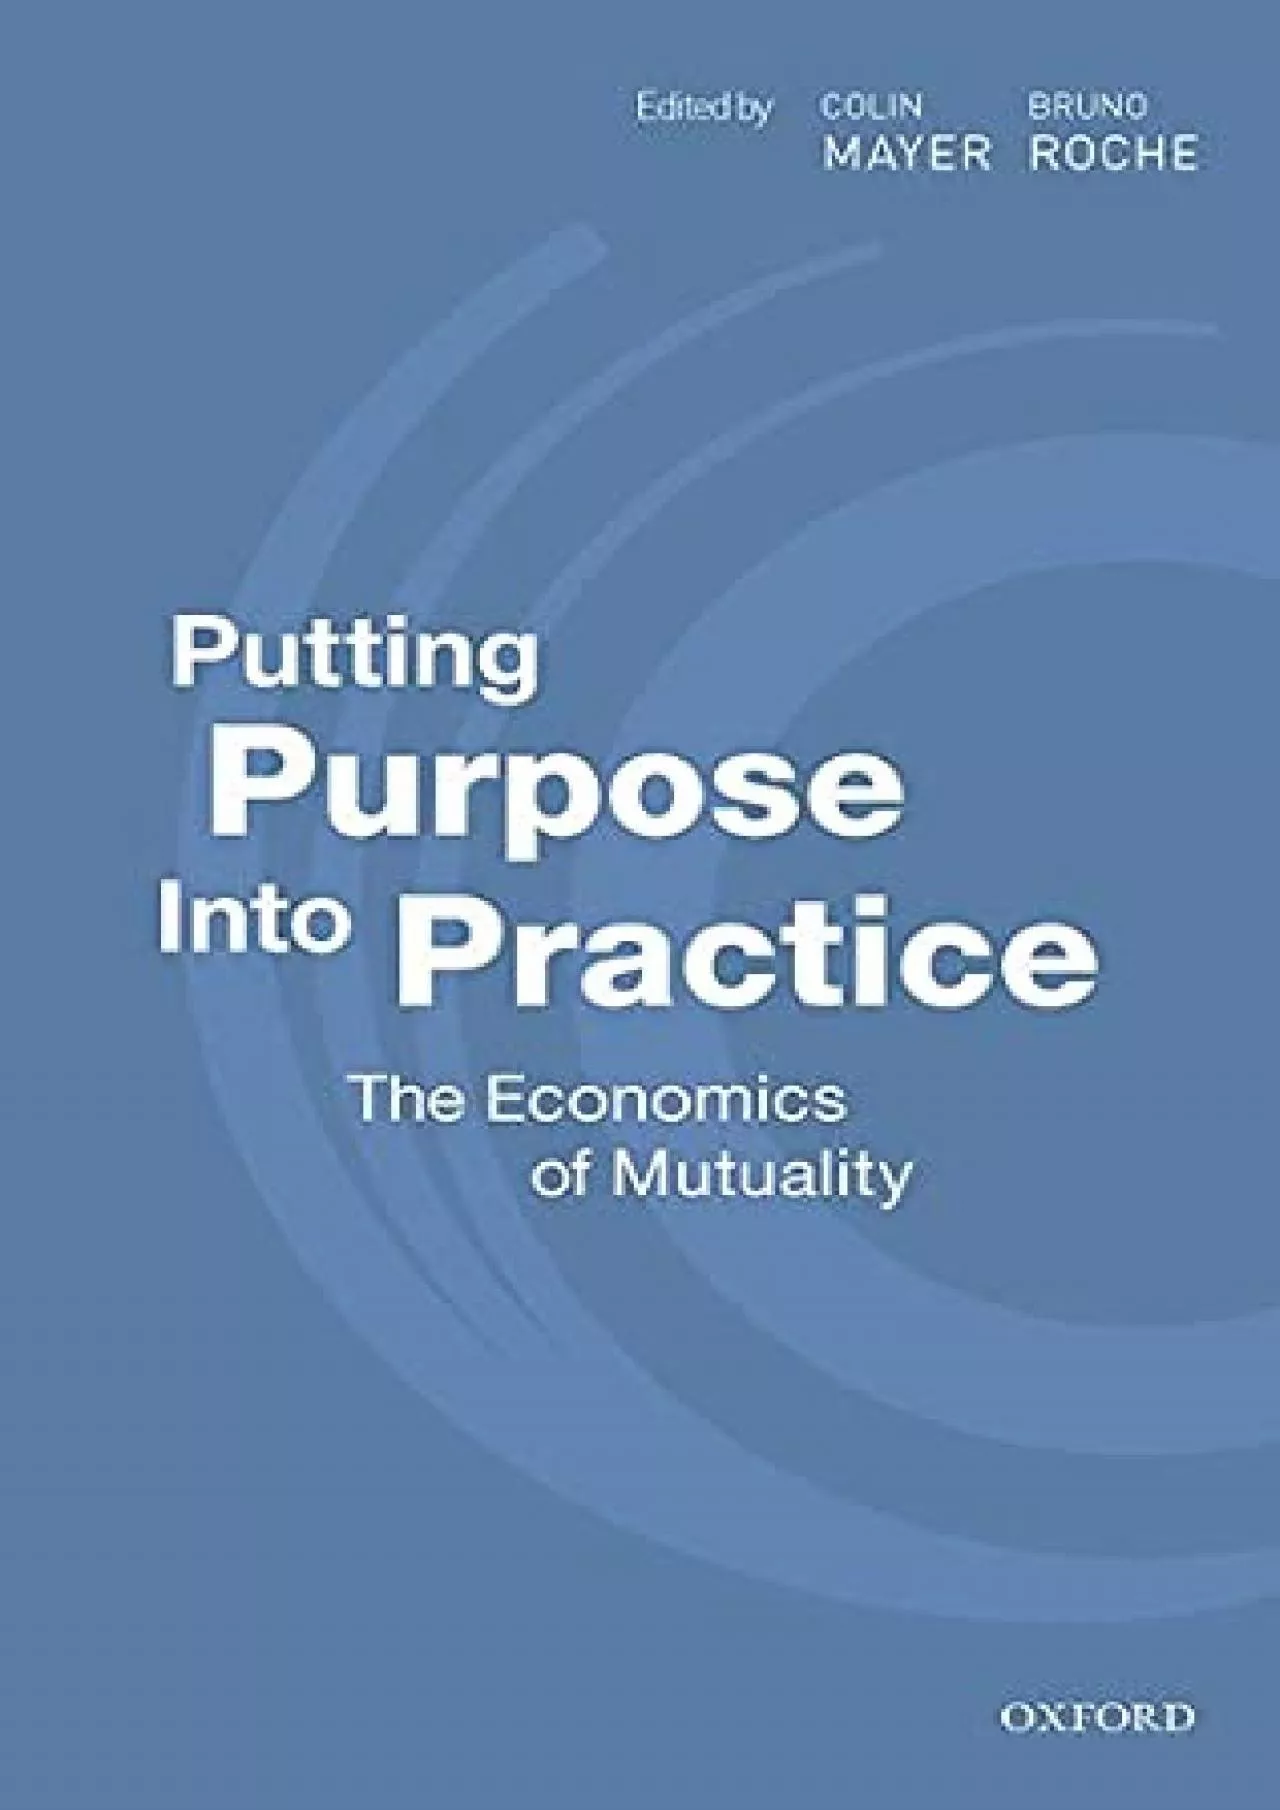 (DOWNLOAD)-Putting Purpose Into Practice: The Economics of Mutuality